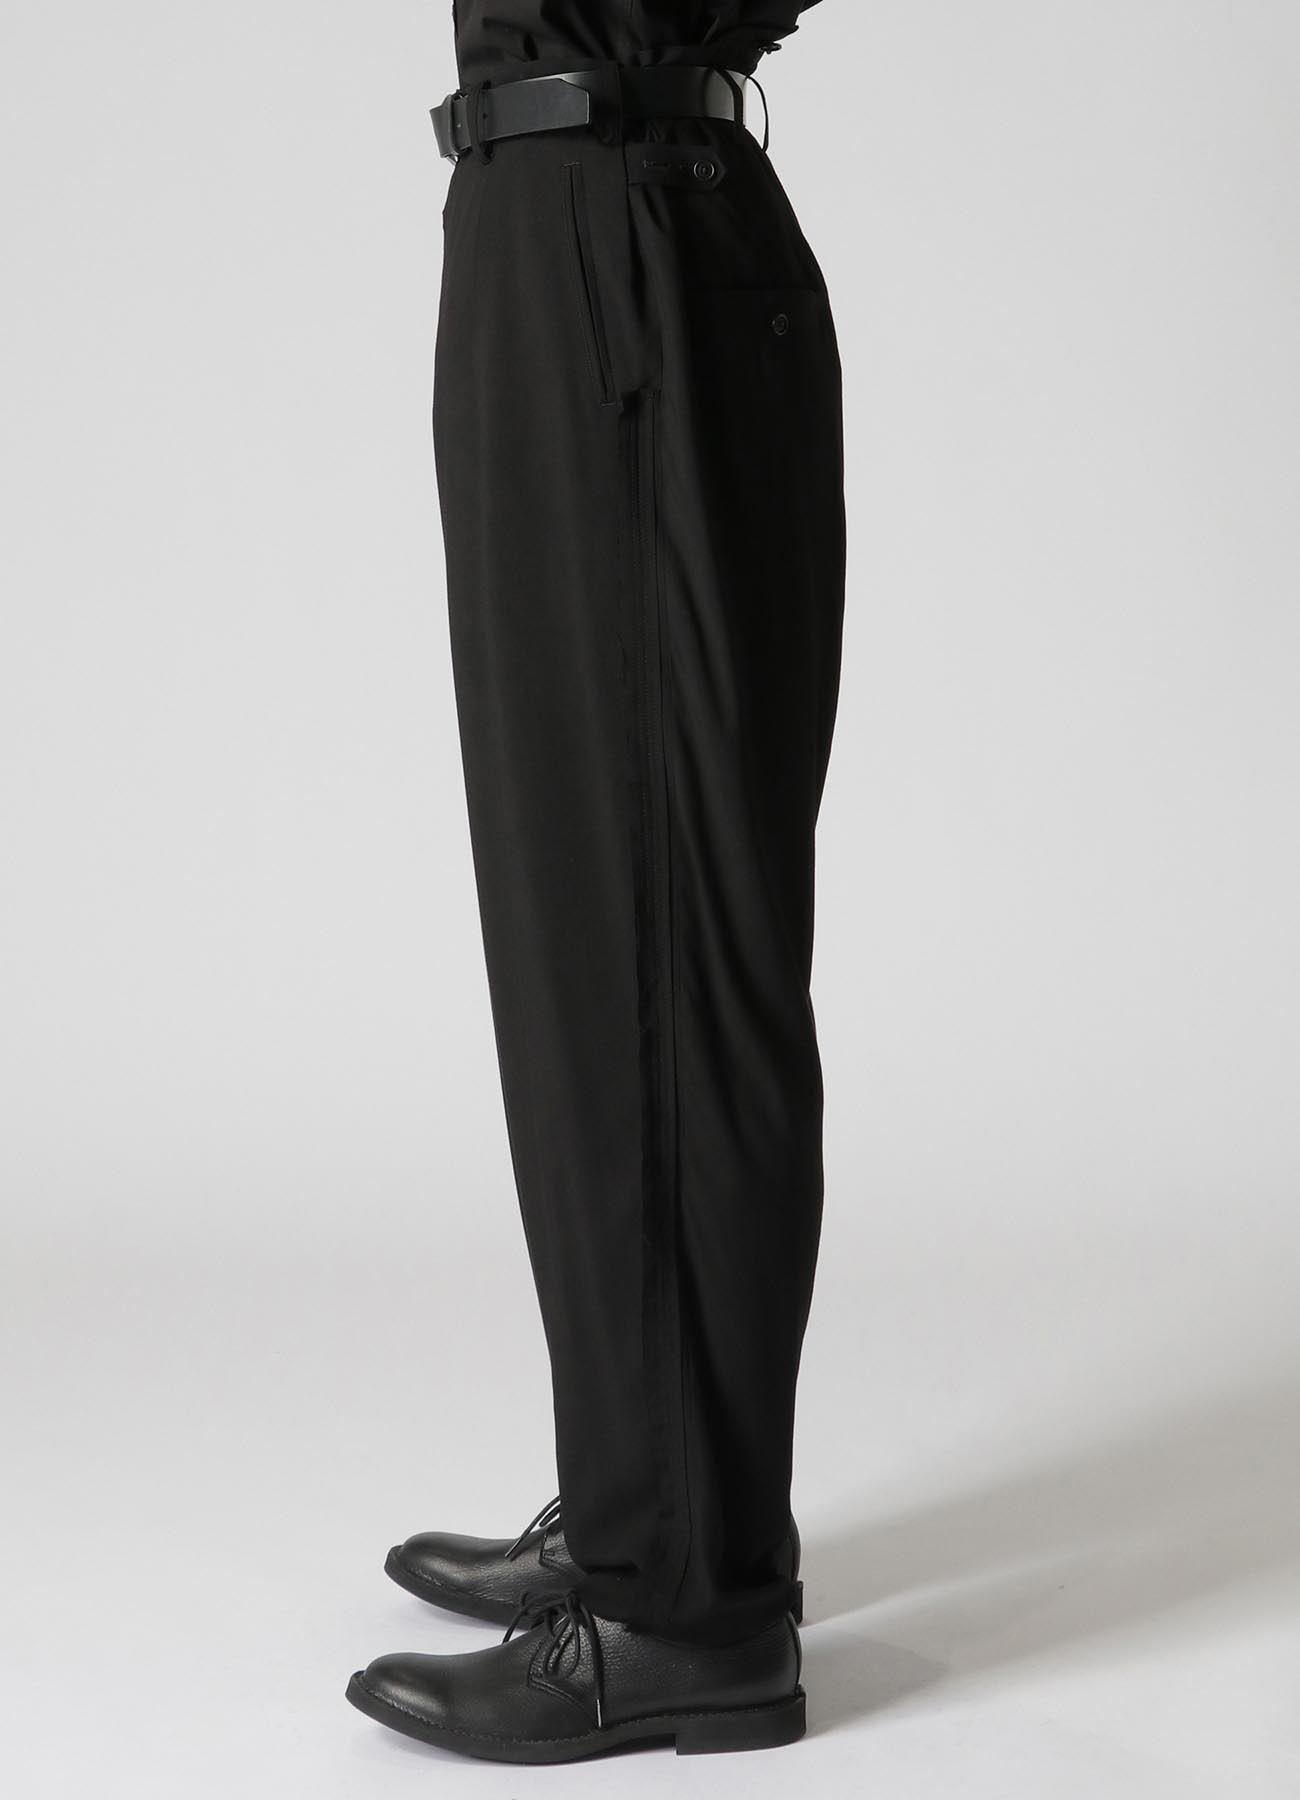 RAYON CAMBRIC SUSPENDER PANTS WITH SIDE DECORATIVE CLOTH